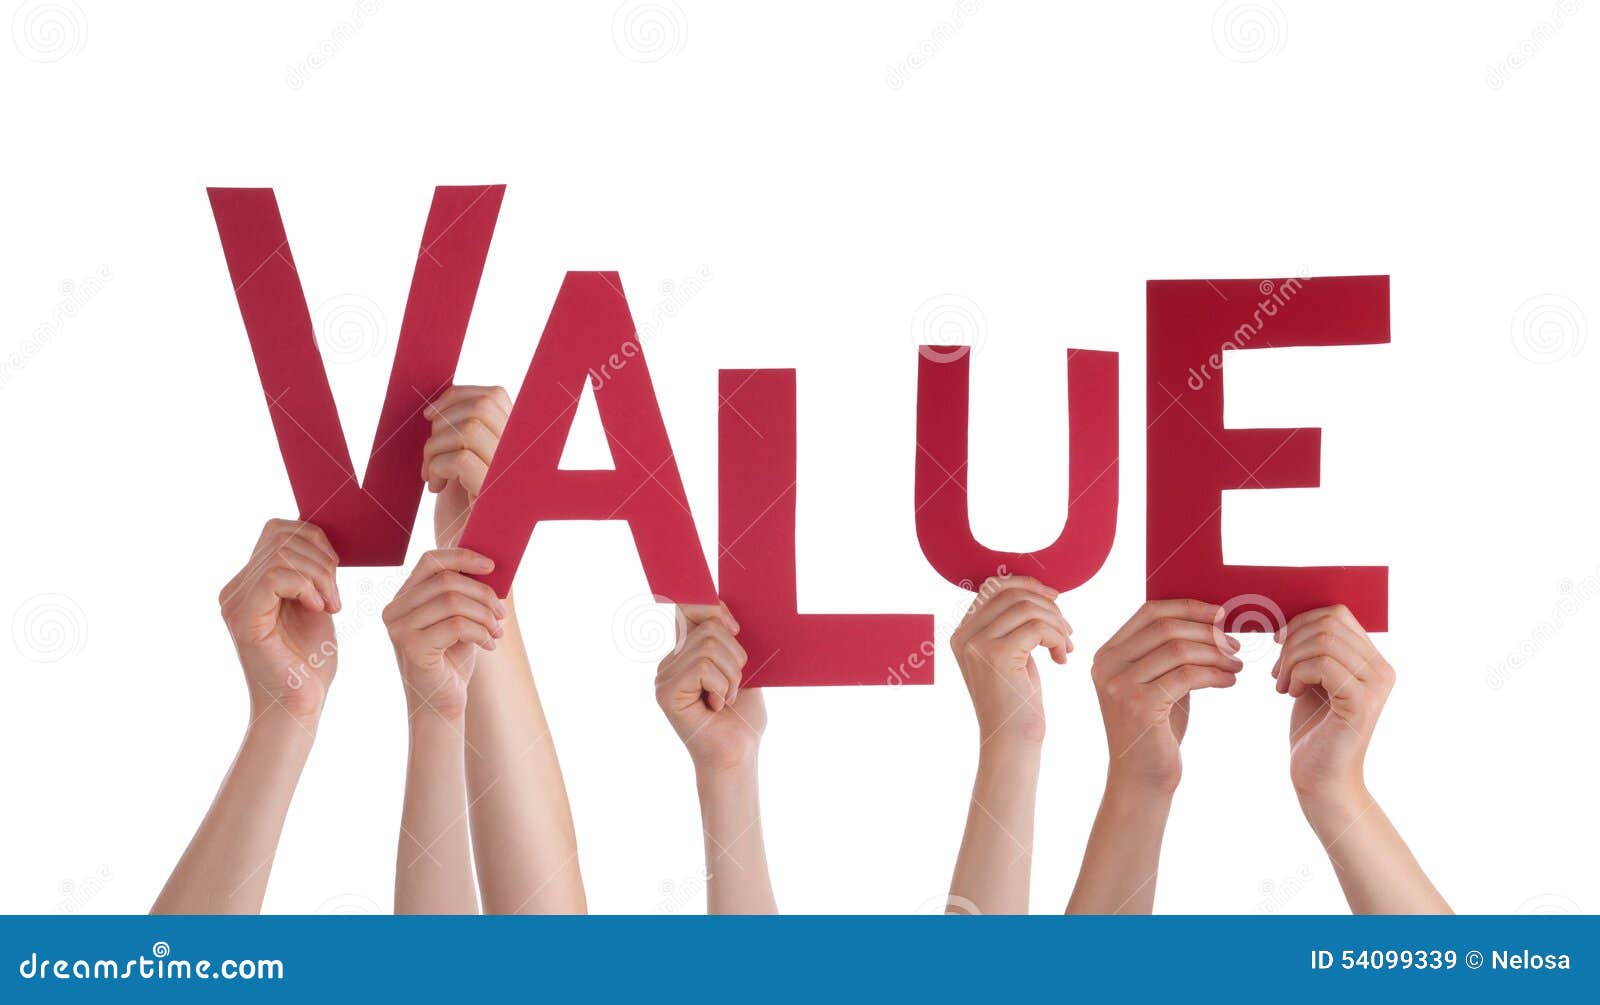 Value in words. Value Words. Value картинка. Values image. Value on you.